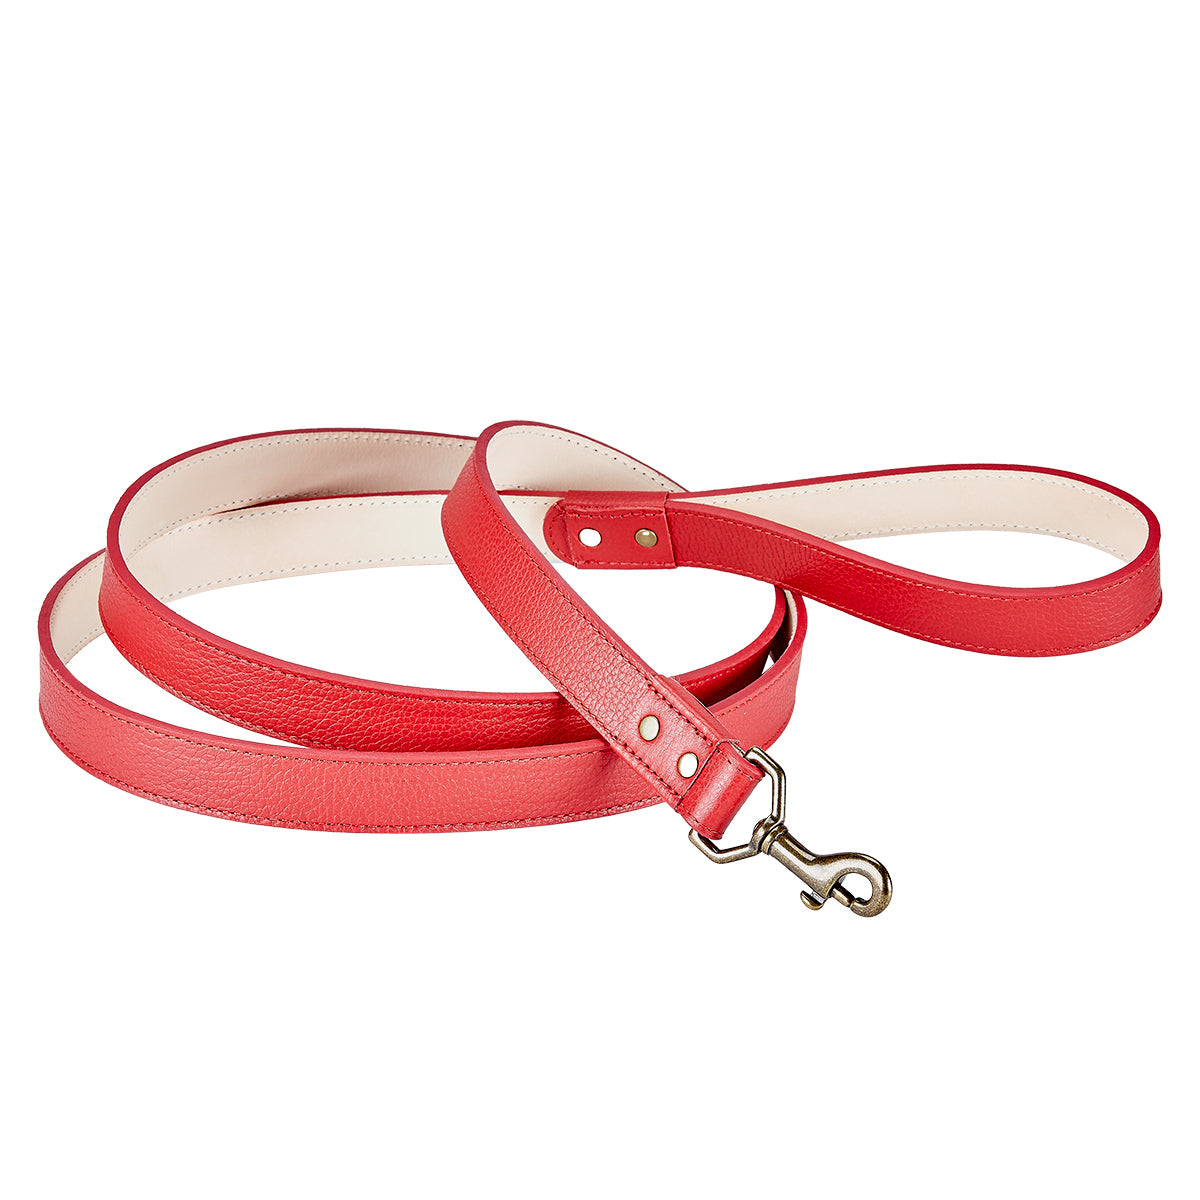 Graphic Image 6 Feet Dog Leash Red Pebble Grain Leather